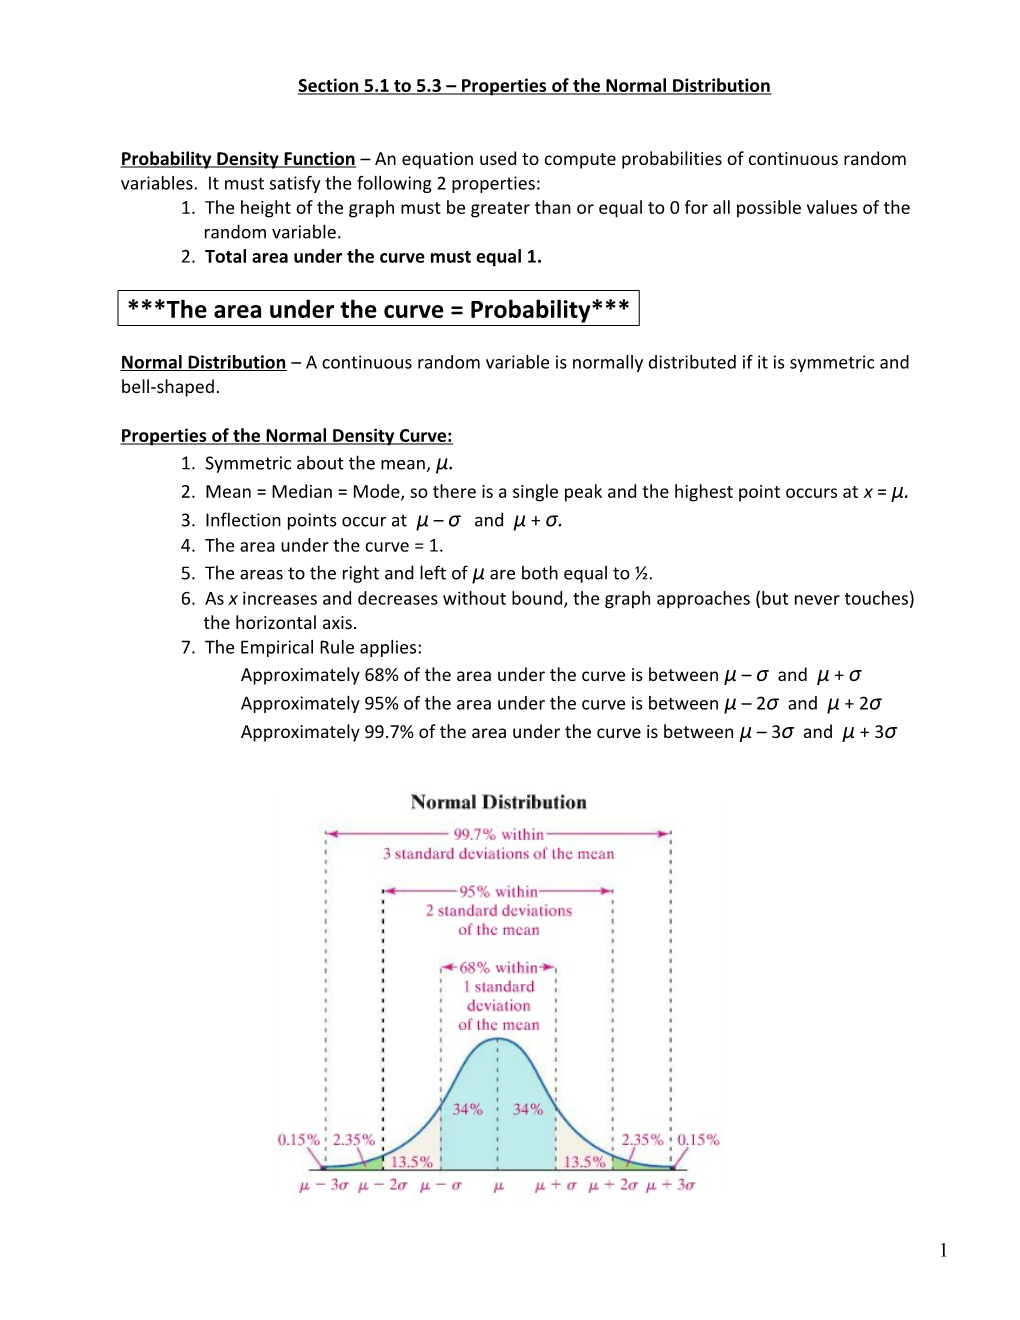 Section 5.1 to 5.3 Properties of the Normal Distribution